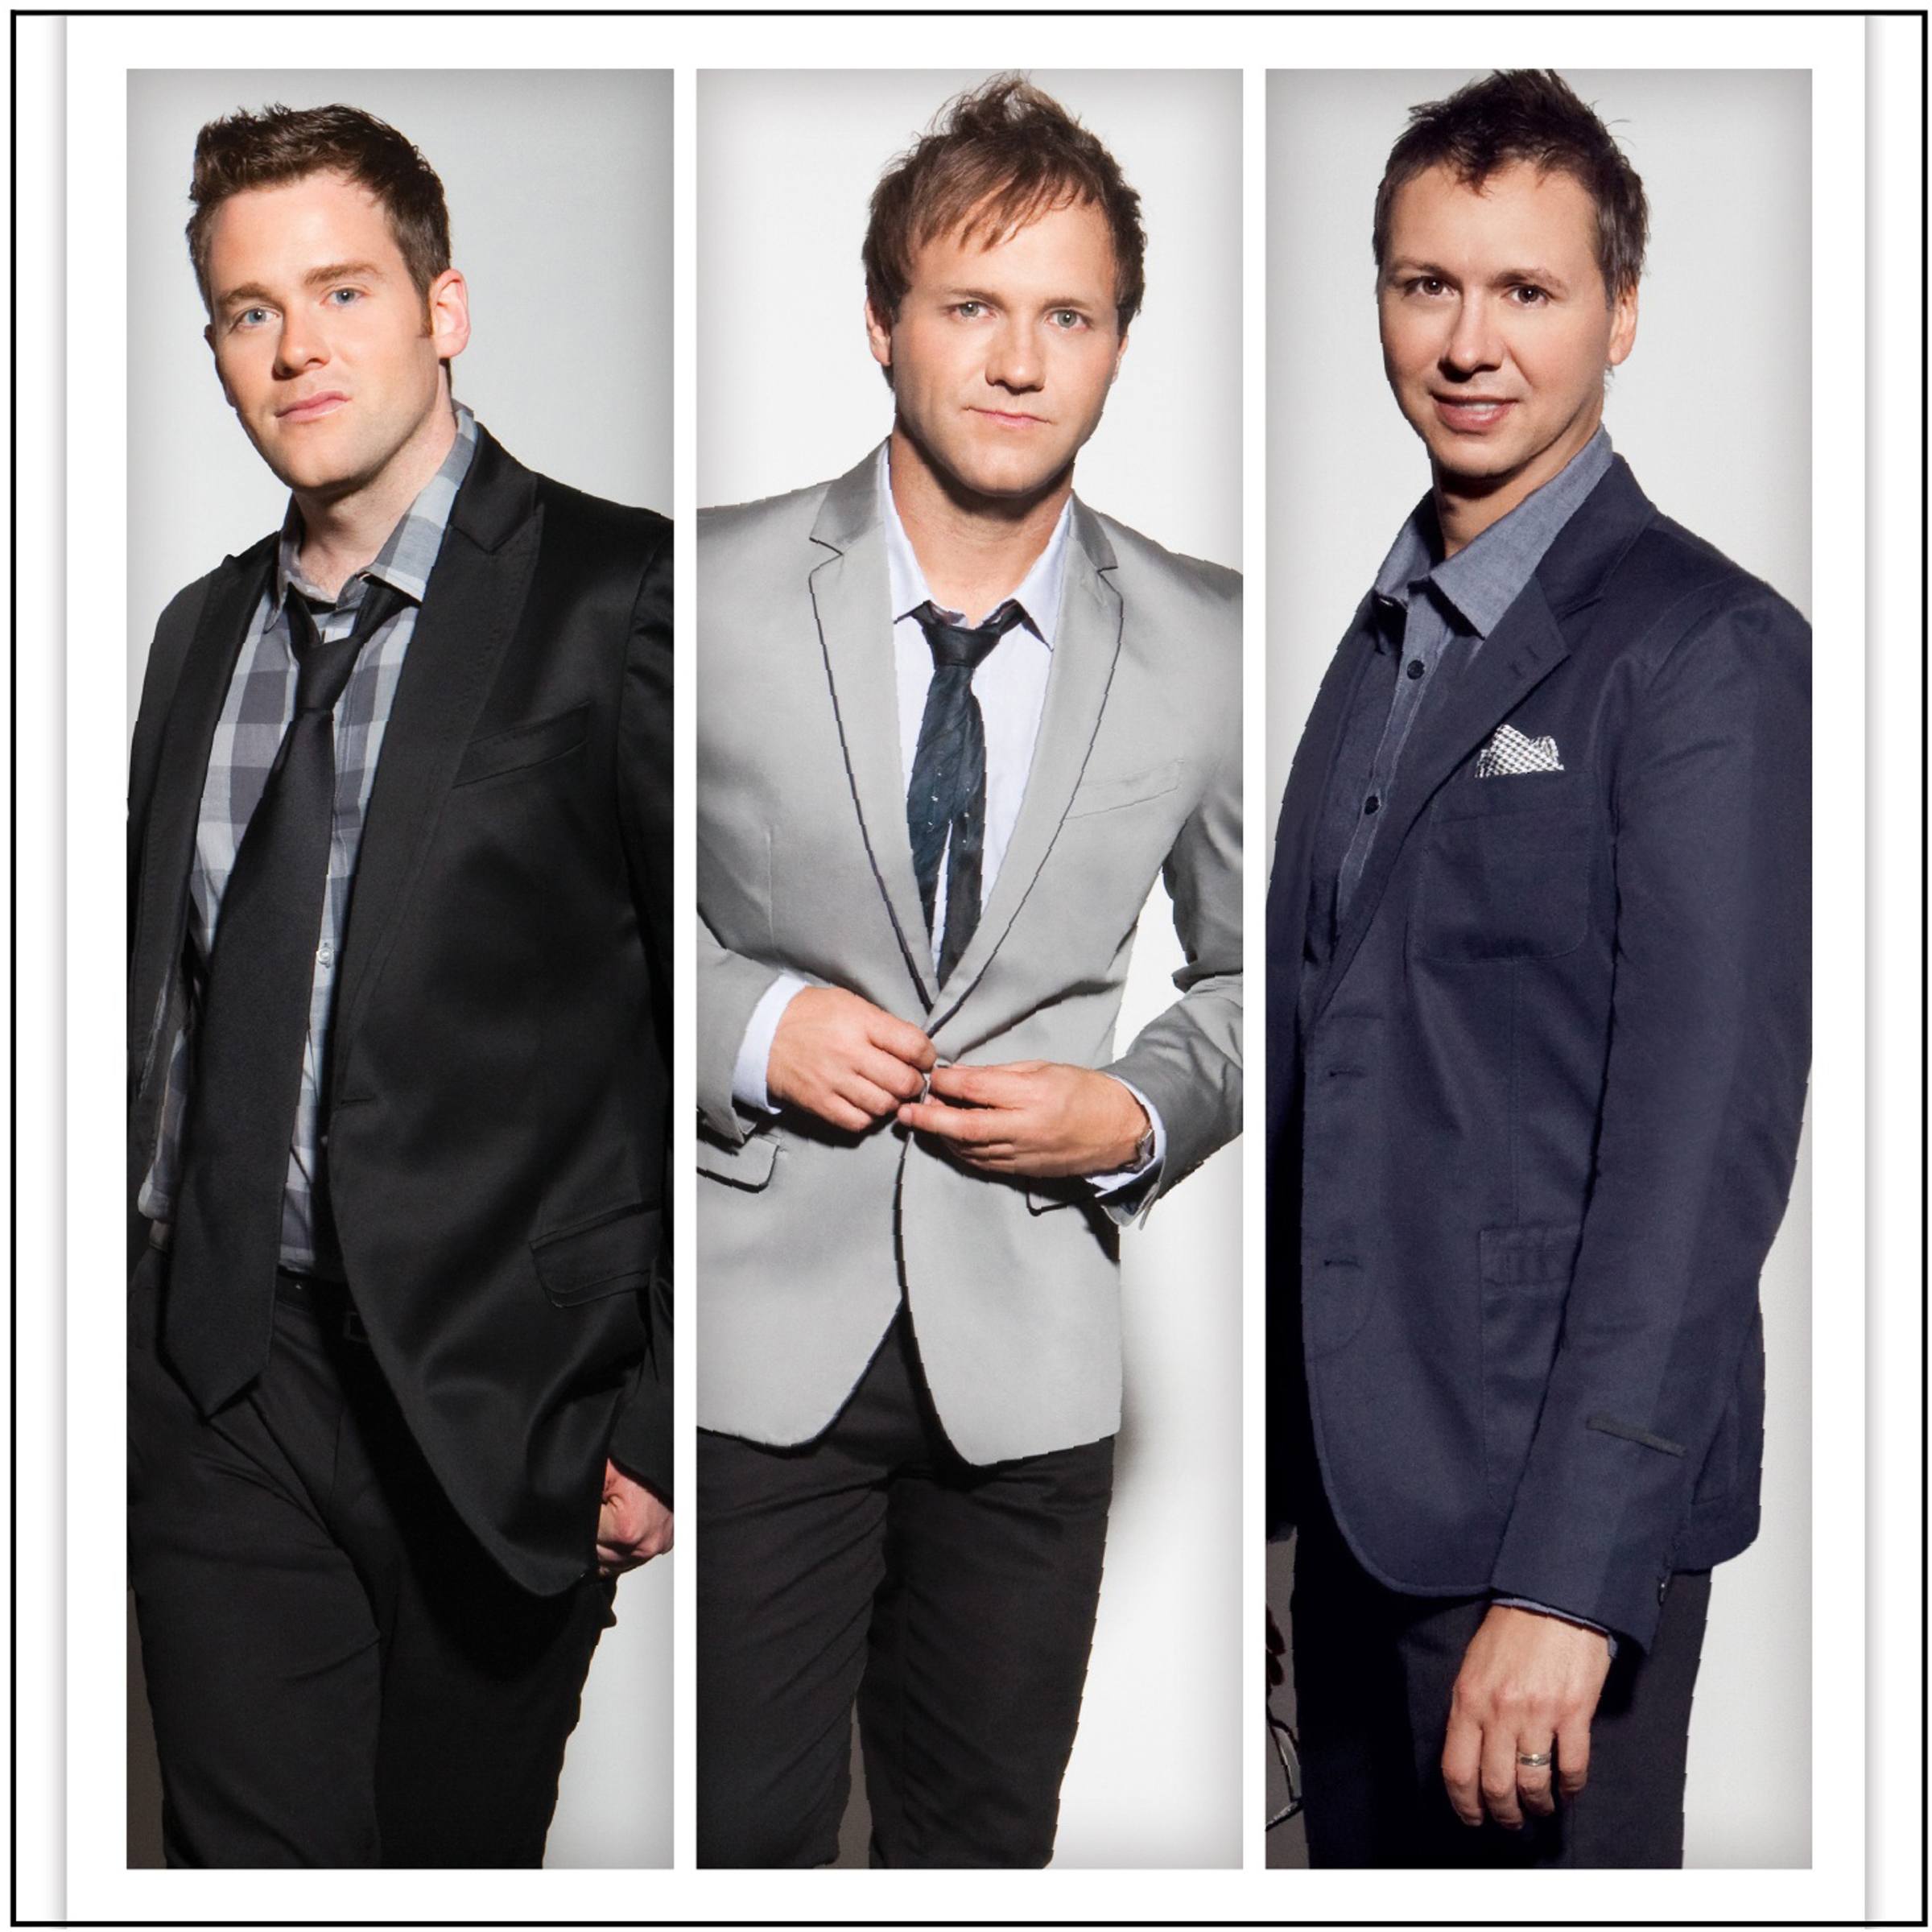 CLASSICAL SOUNDS- Tenore: The Christian Tenors have included Red Deer on their inaugural Canadian tour. Promoting their self-titled debut CD